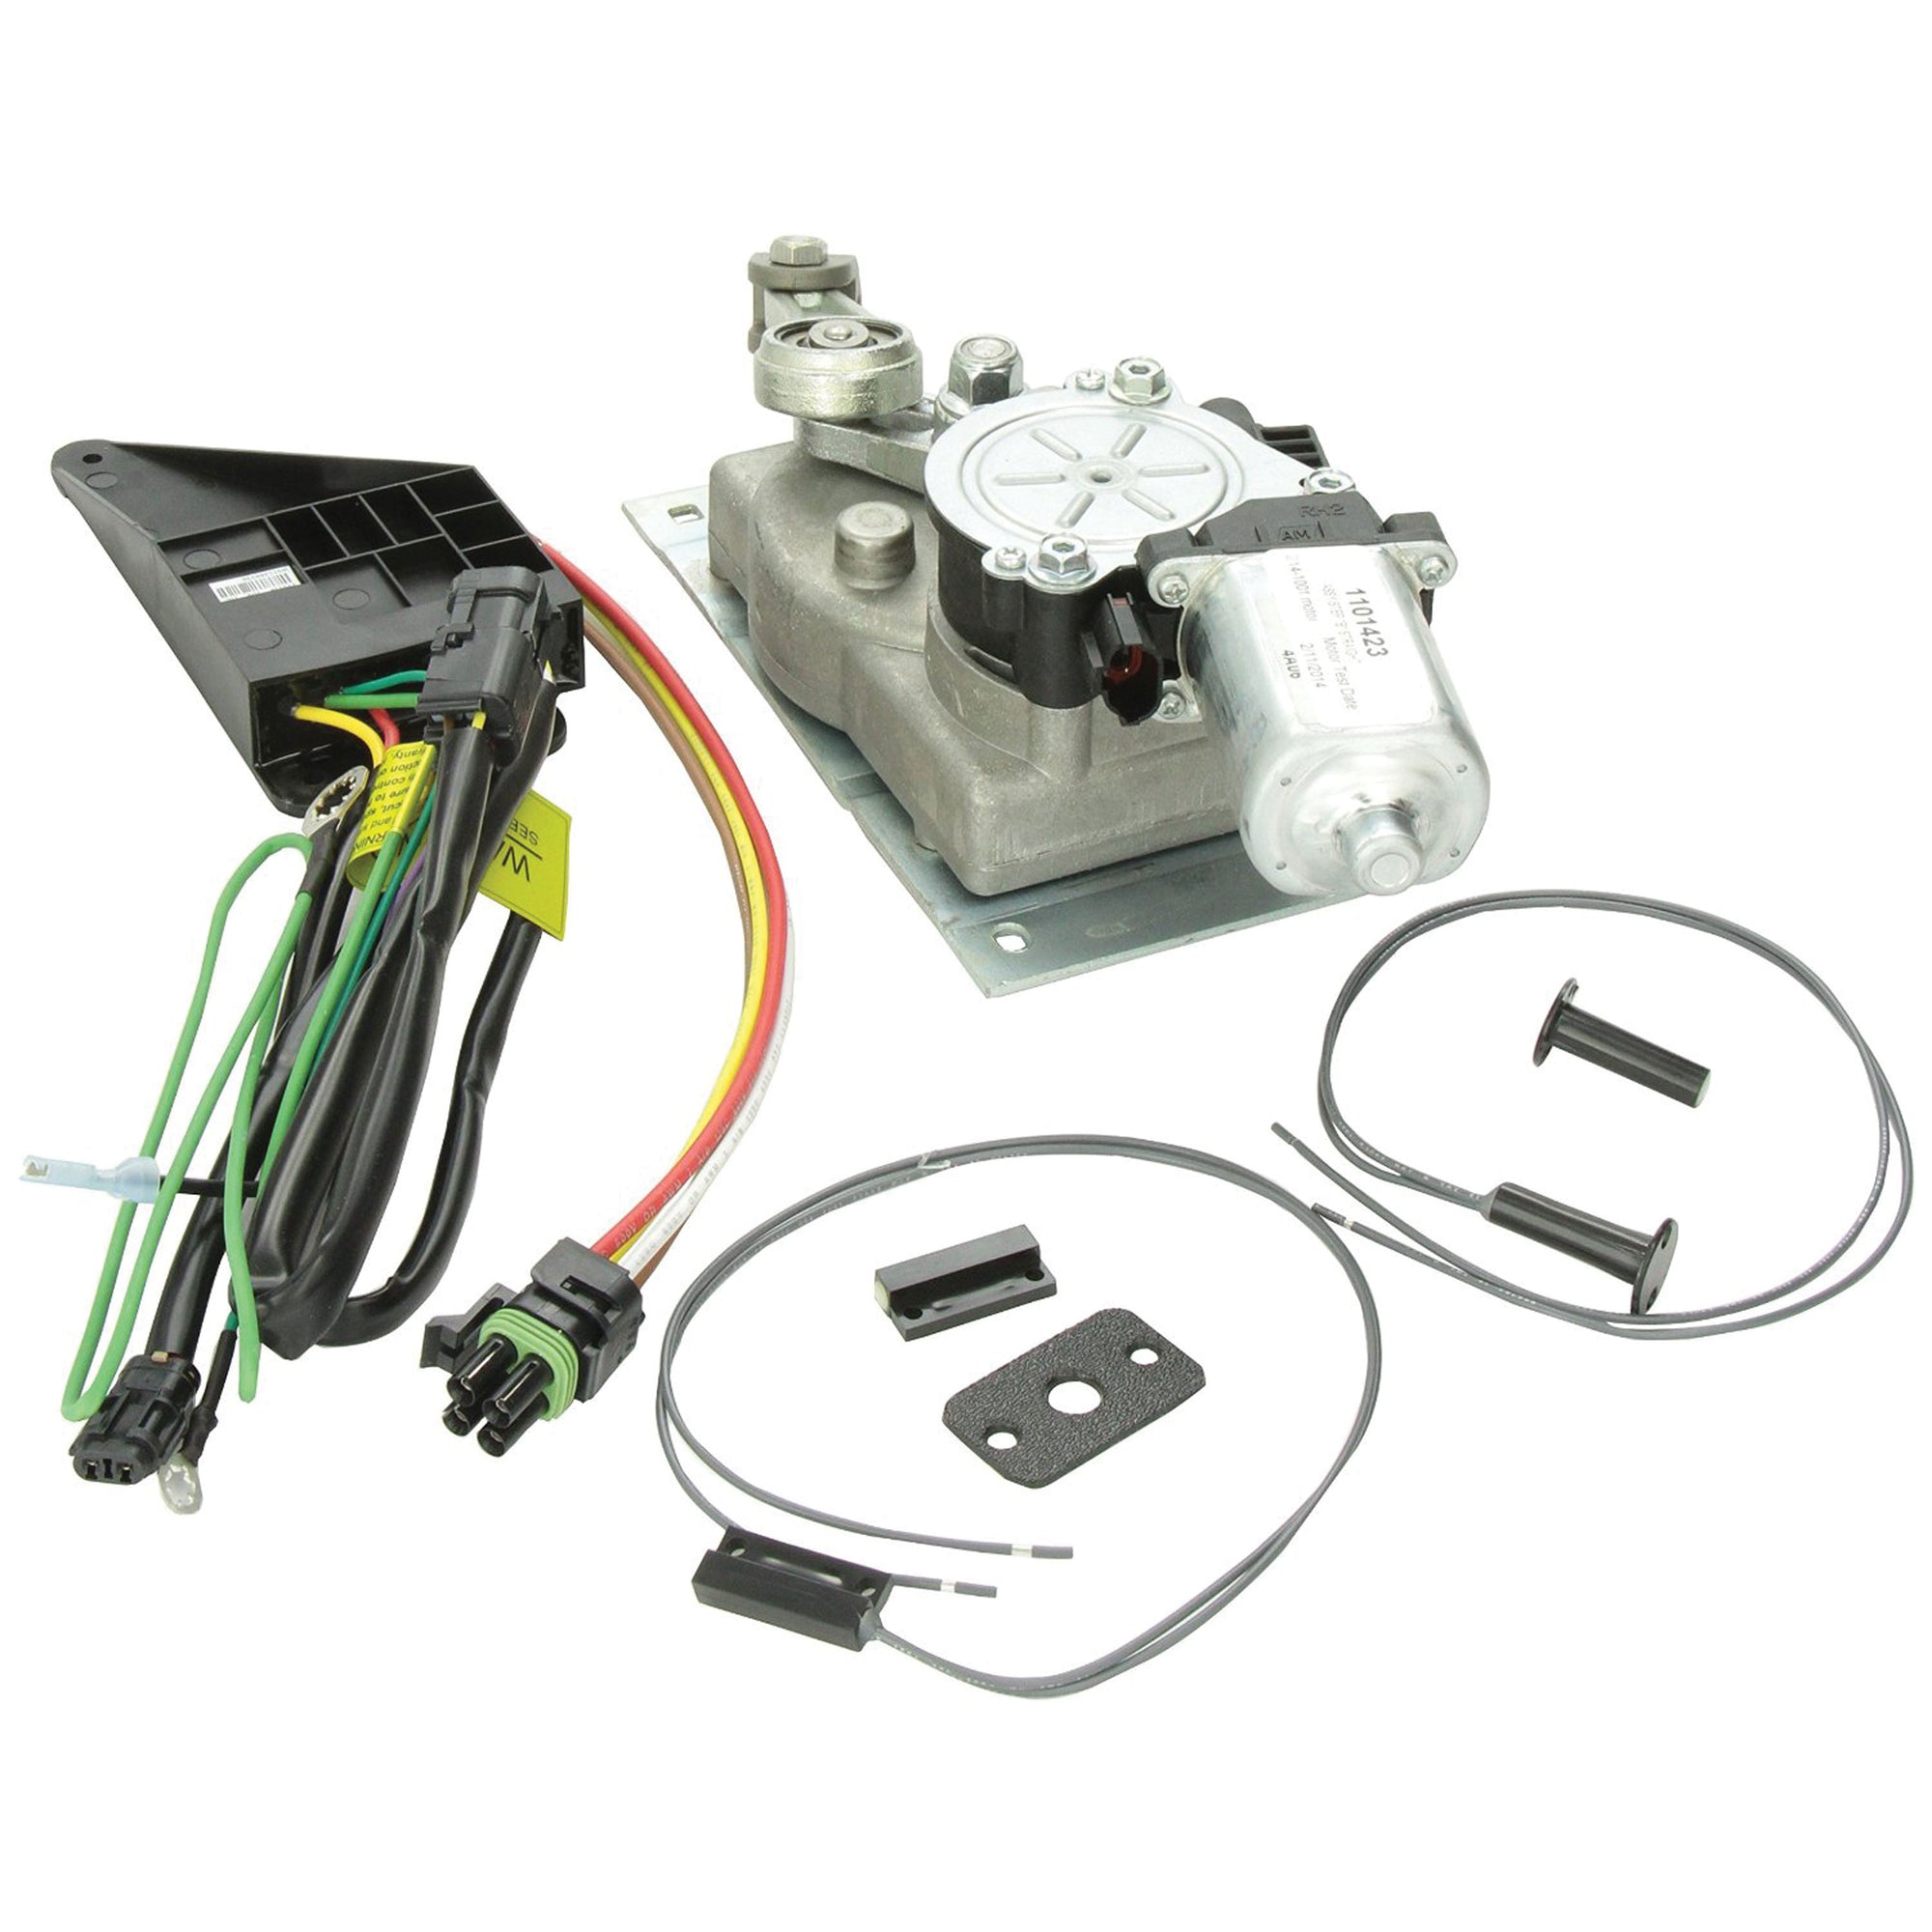 Lippert 379769 Kwikee Replacement Kit for 28, 31, 37, 39 Series IMGL/9510 Control